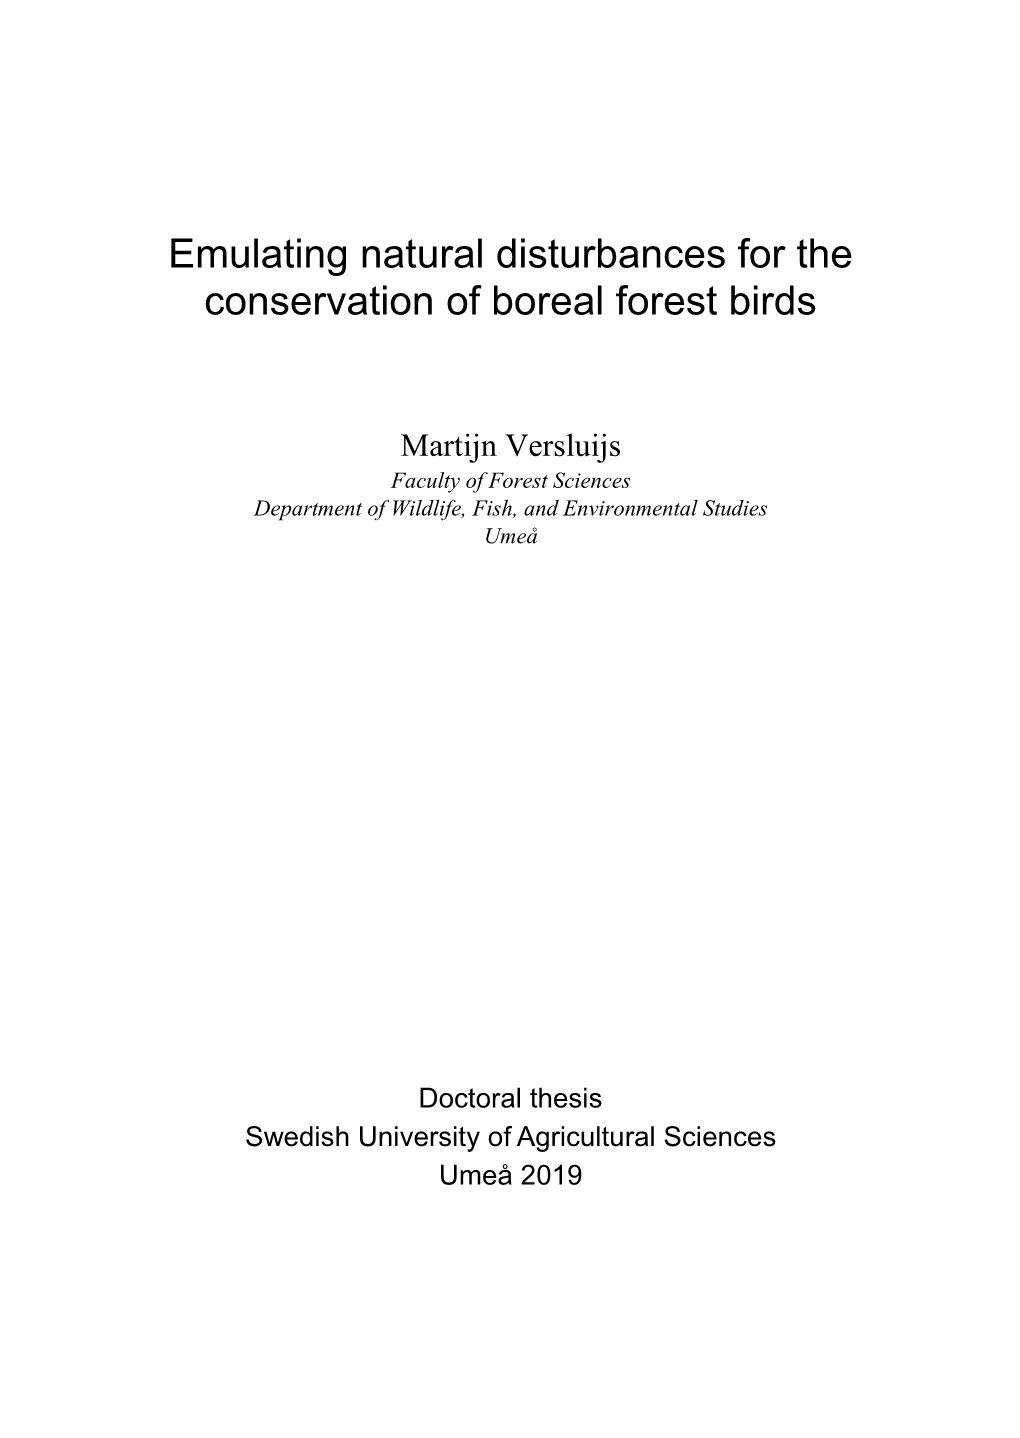 Emulating Natural Disturbances for the Conservation of Boreal Forest Birds